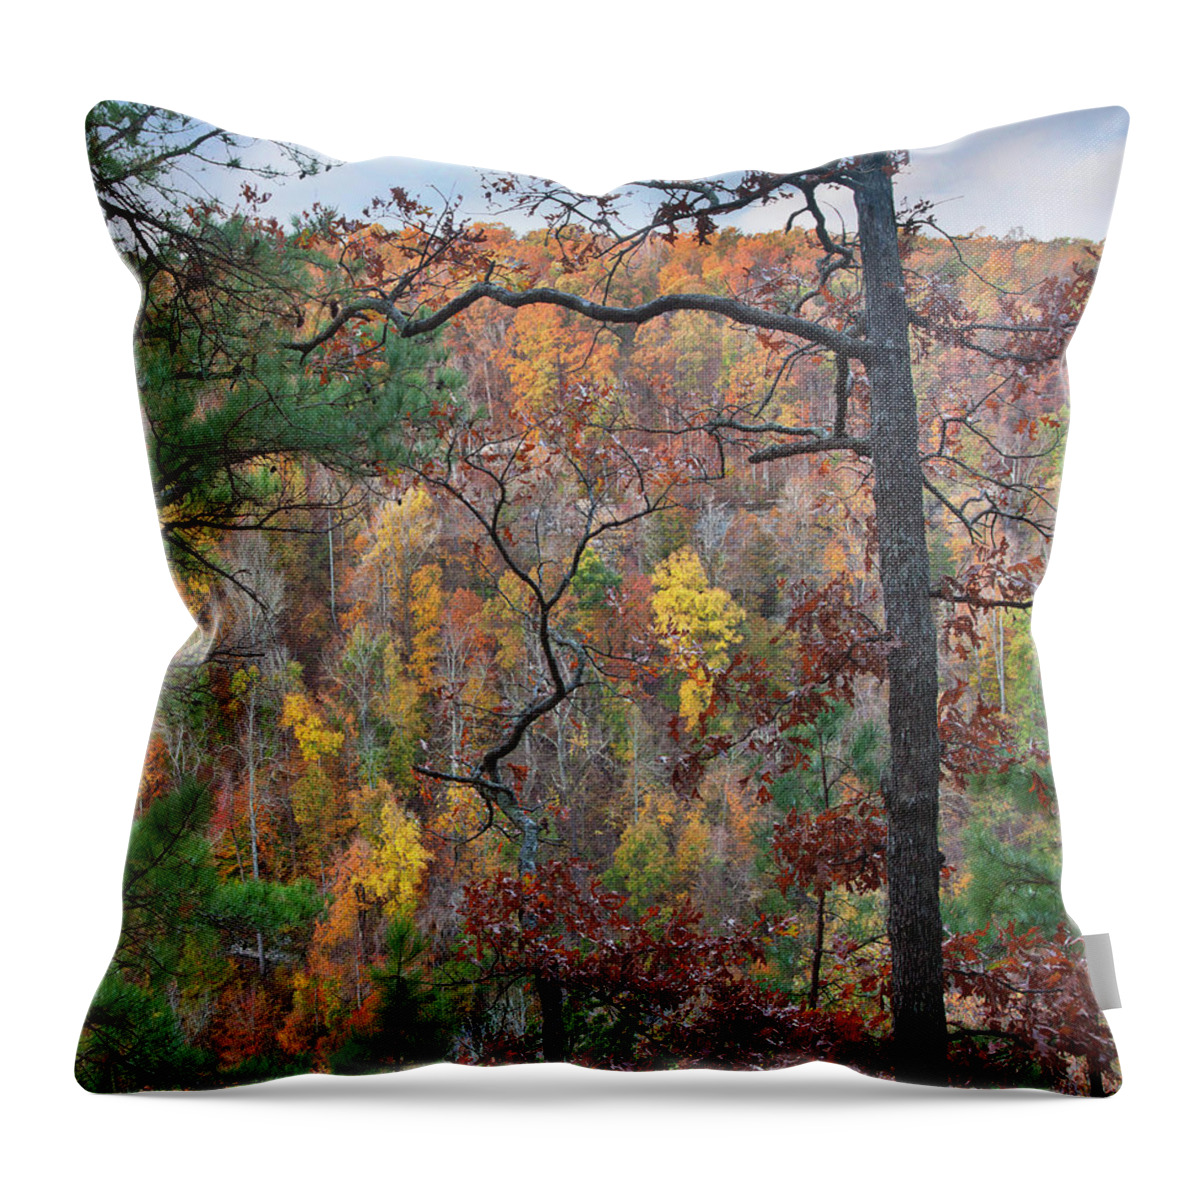 Autumn Throw Pillow featuring the photograph Forest by Tim Fitzharris